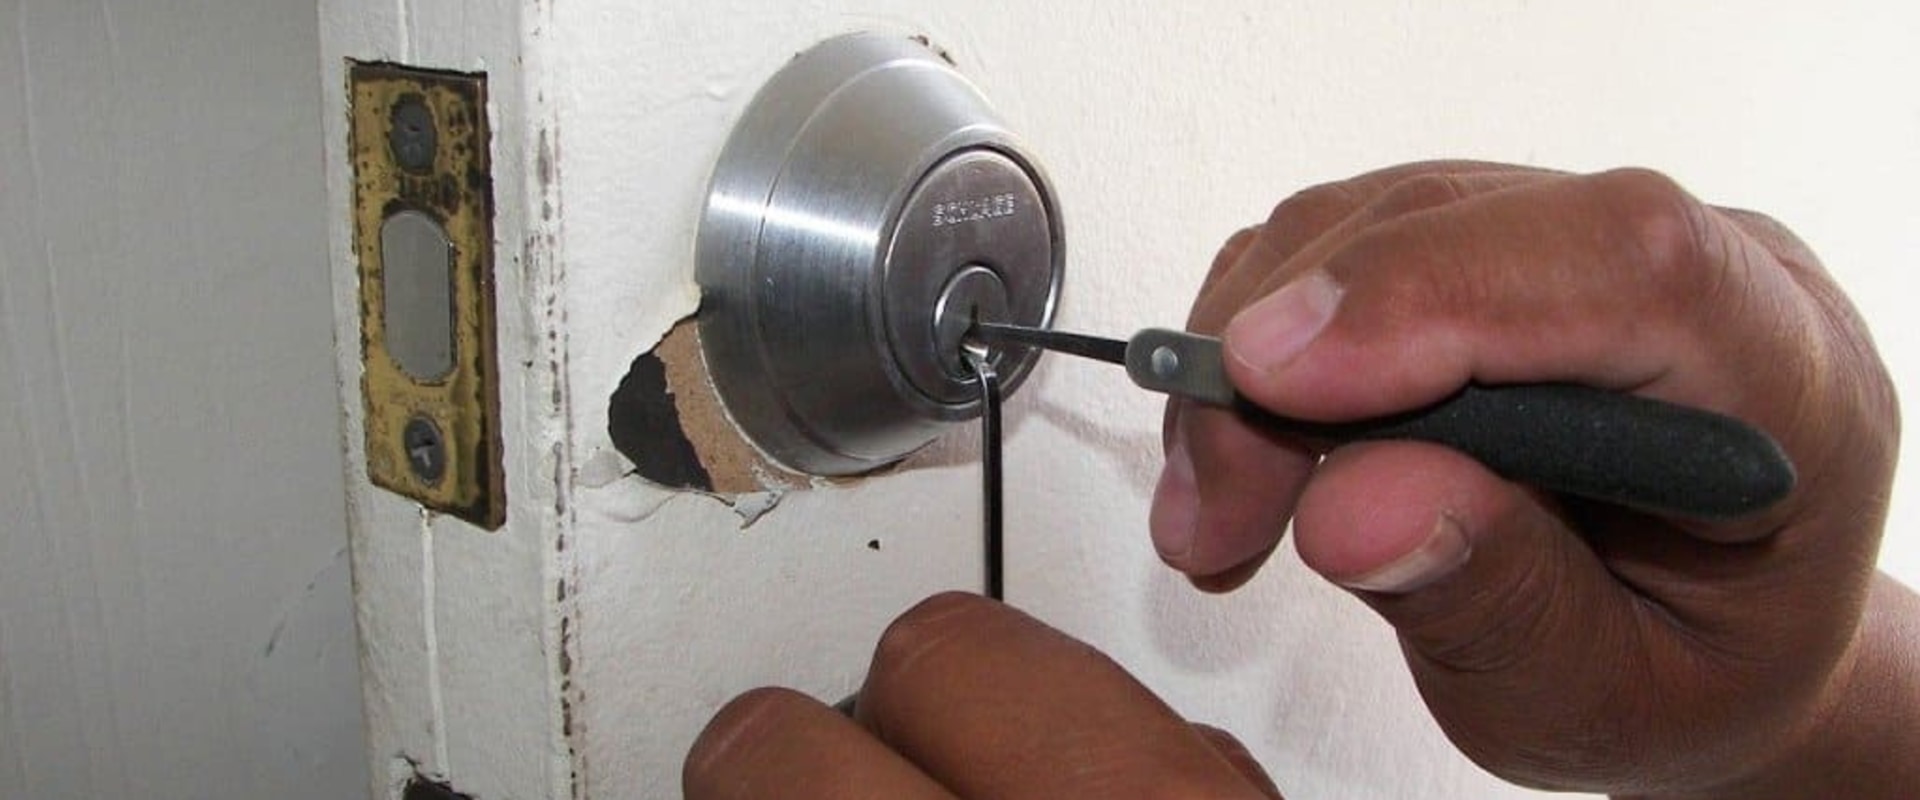 Can a Locksmith Make a Key from a Lock?